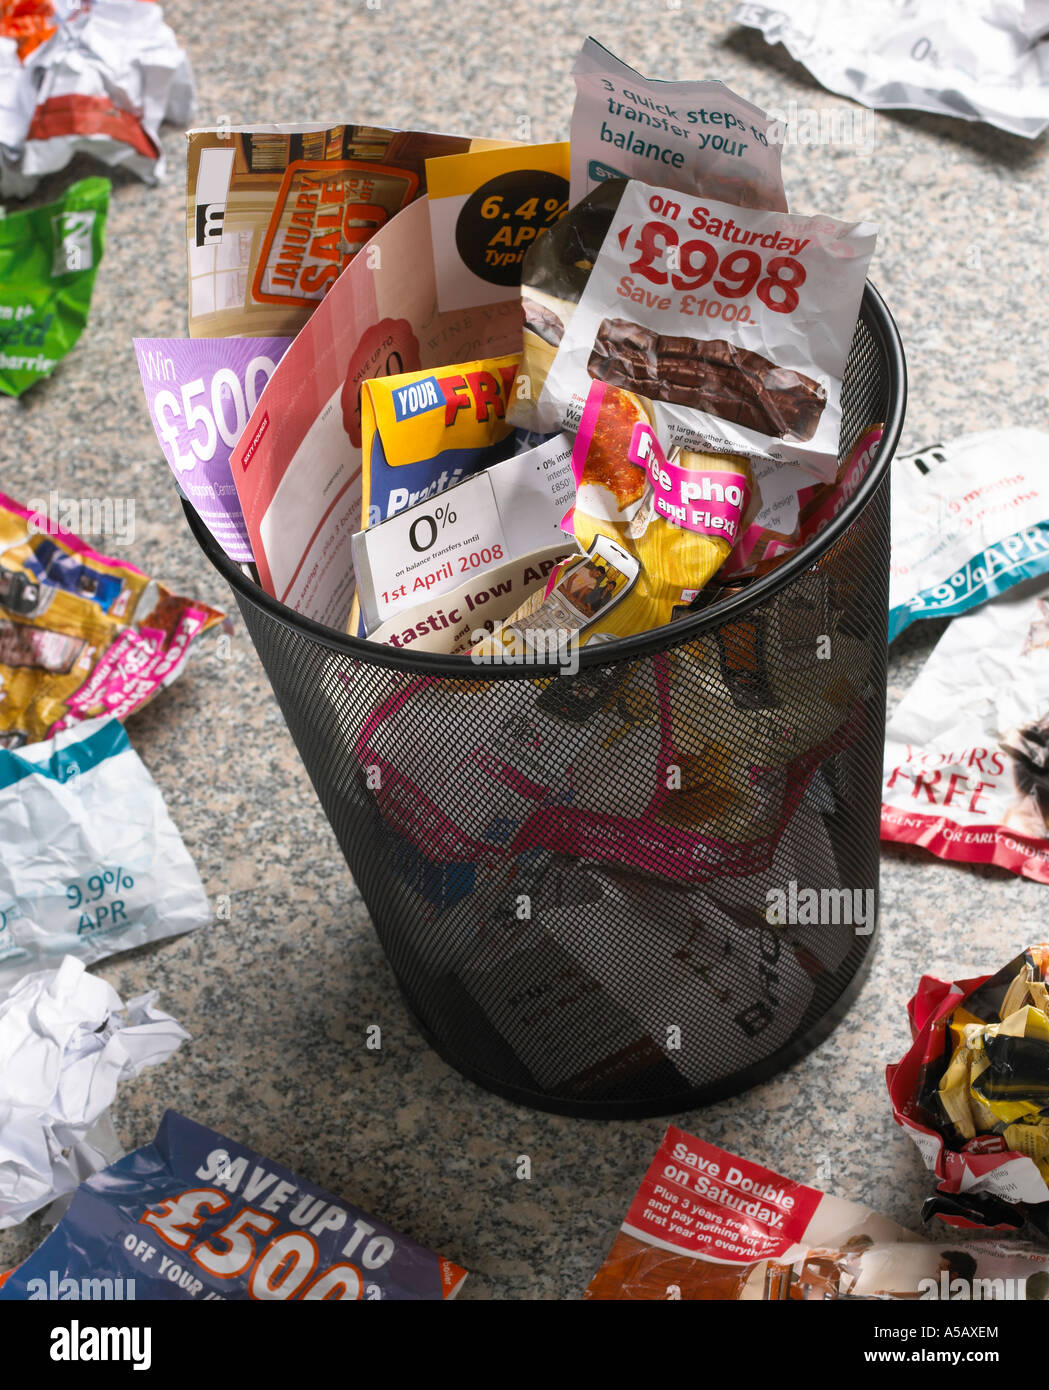 WASTE PAPER BIN FULL OF UNWANTED JUNK MAIL Stock Photo